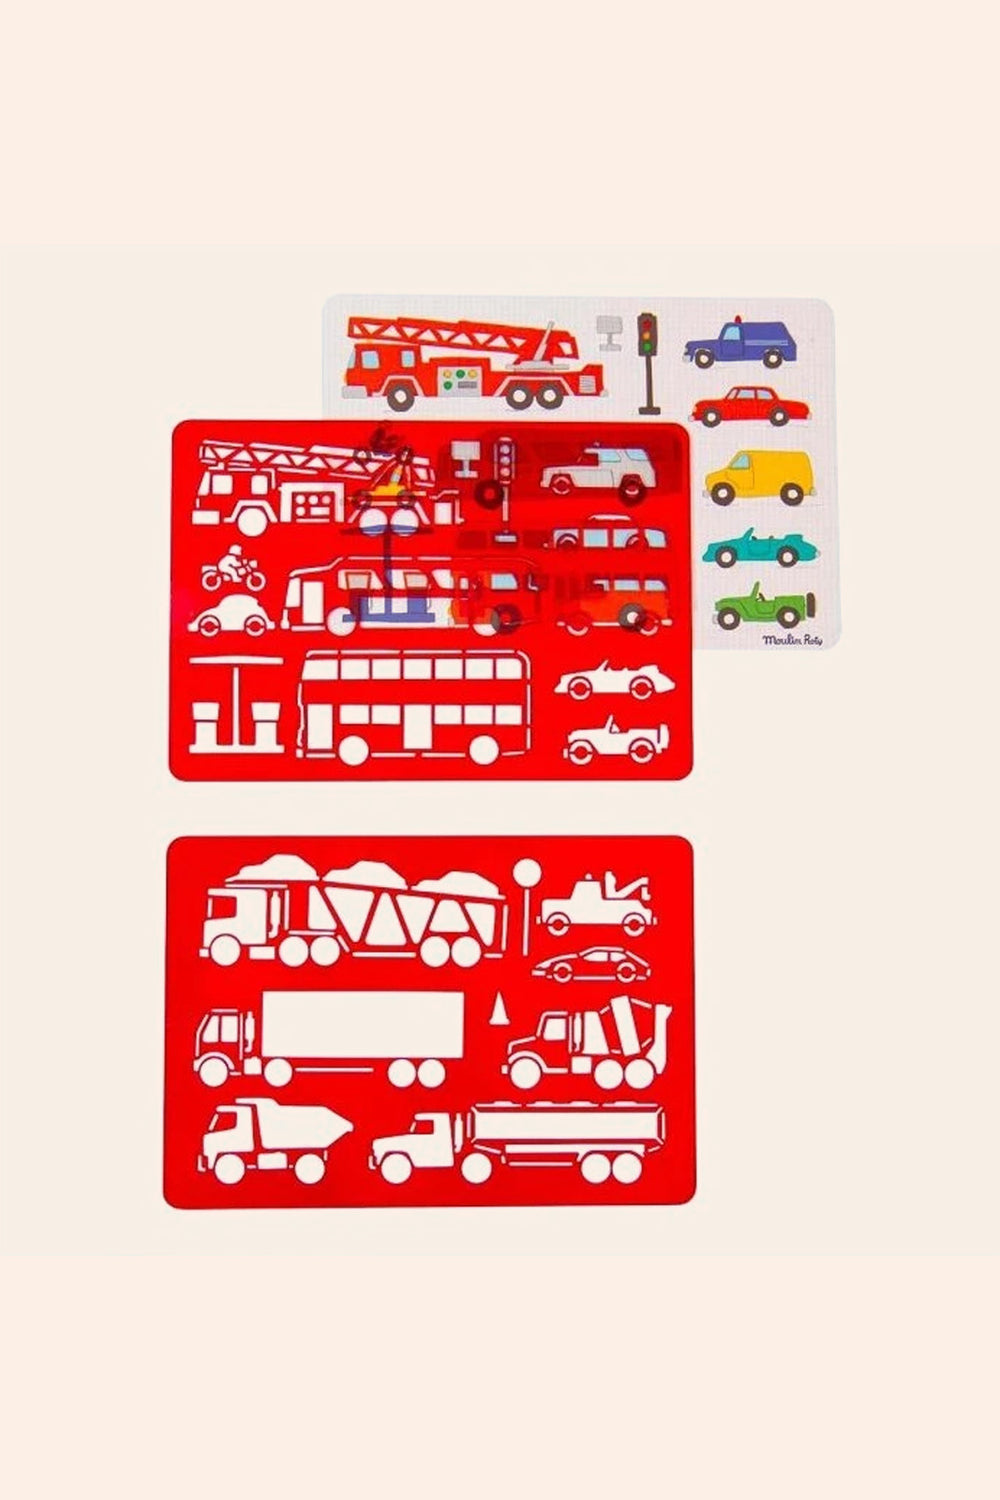 Drawing Stencil Sets - Vehicles - Moulin Roty